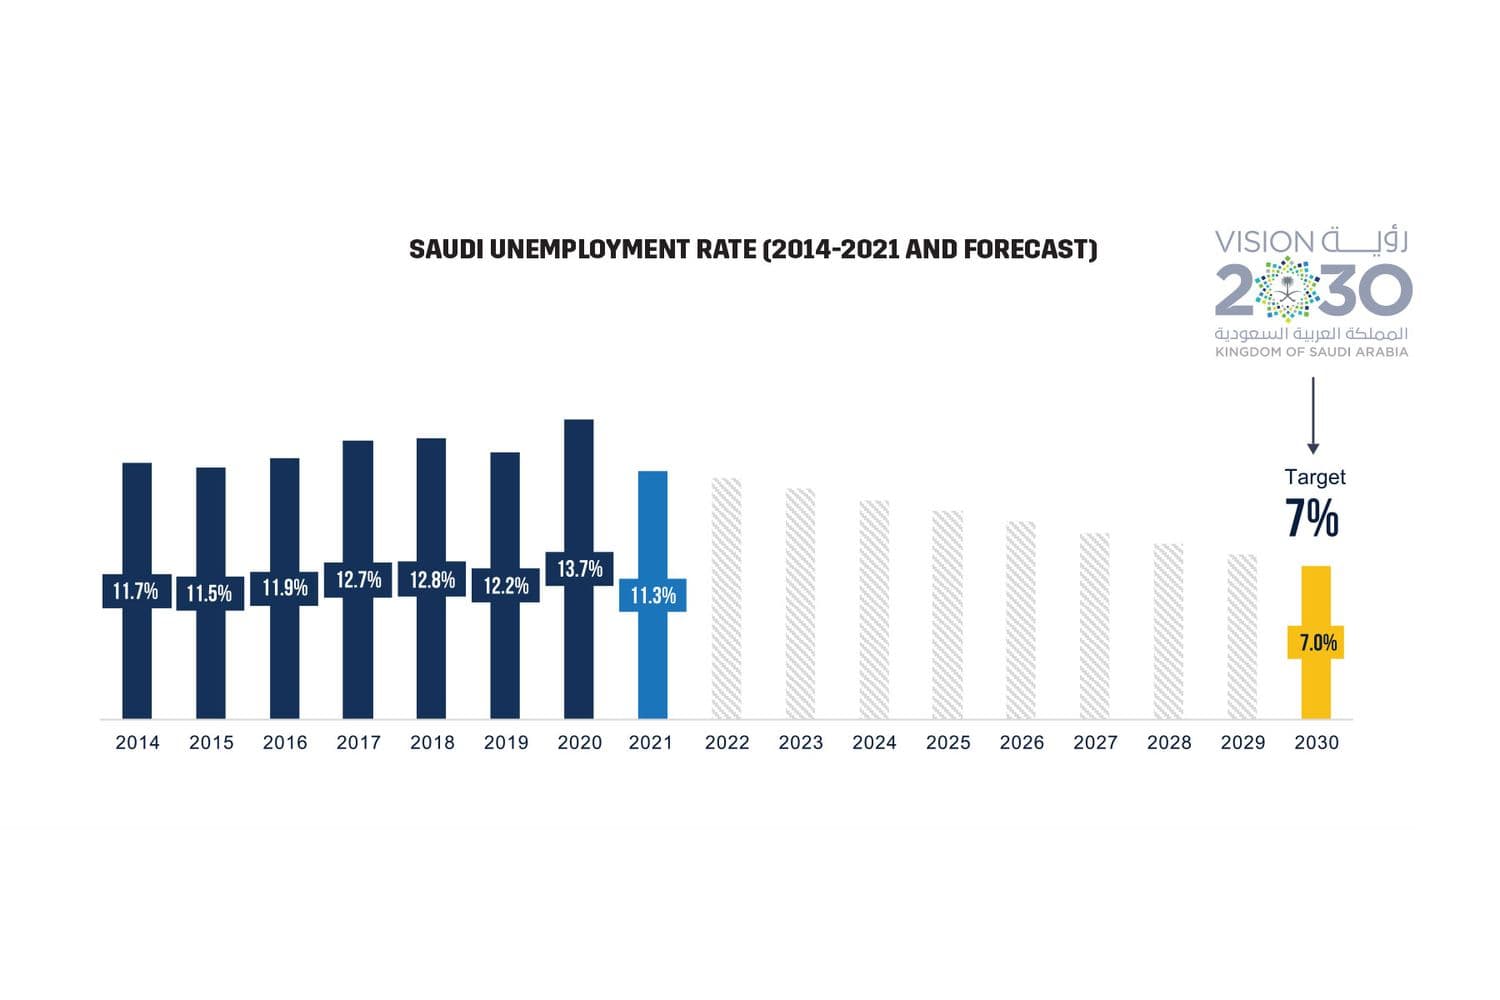 Saudi Unemployment Rate (2014-2021 and Forecast)